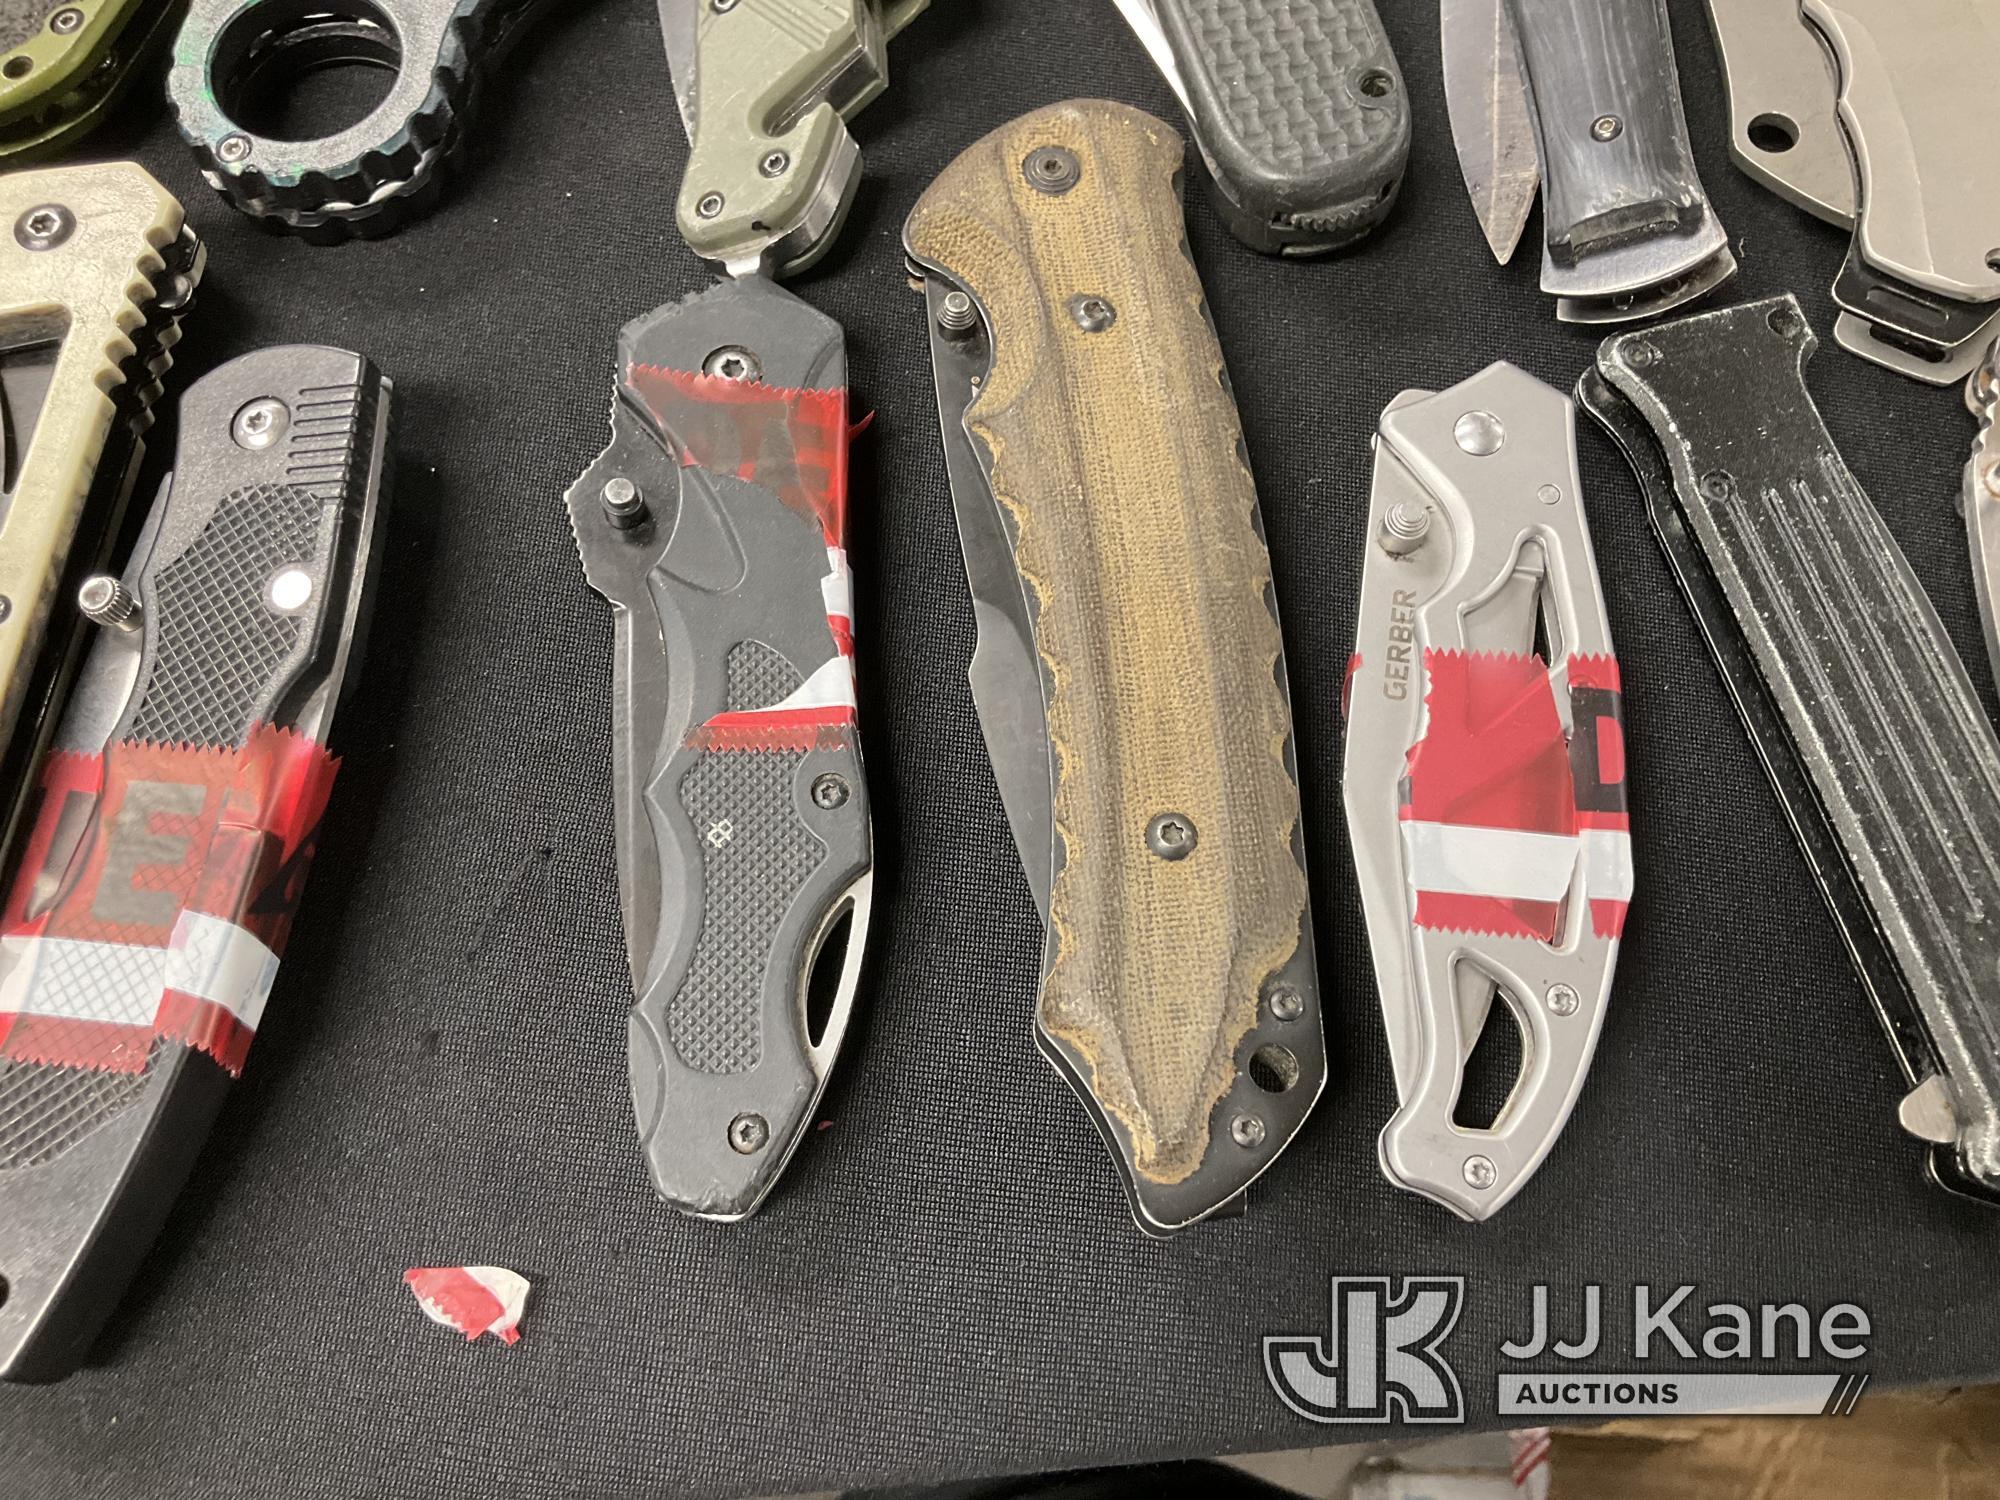 (Jurupa Valley, CA) Knives (Used) NOTE: This unit is being sold AS IS/WHERE IS via Timed Auction and